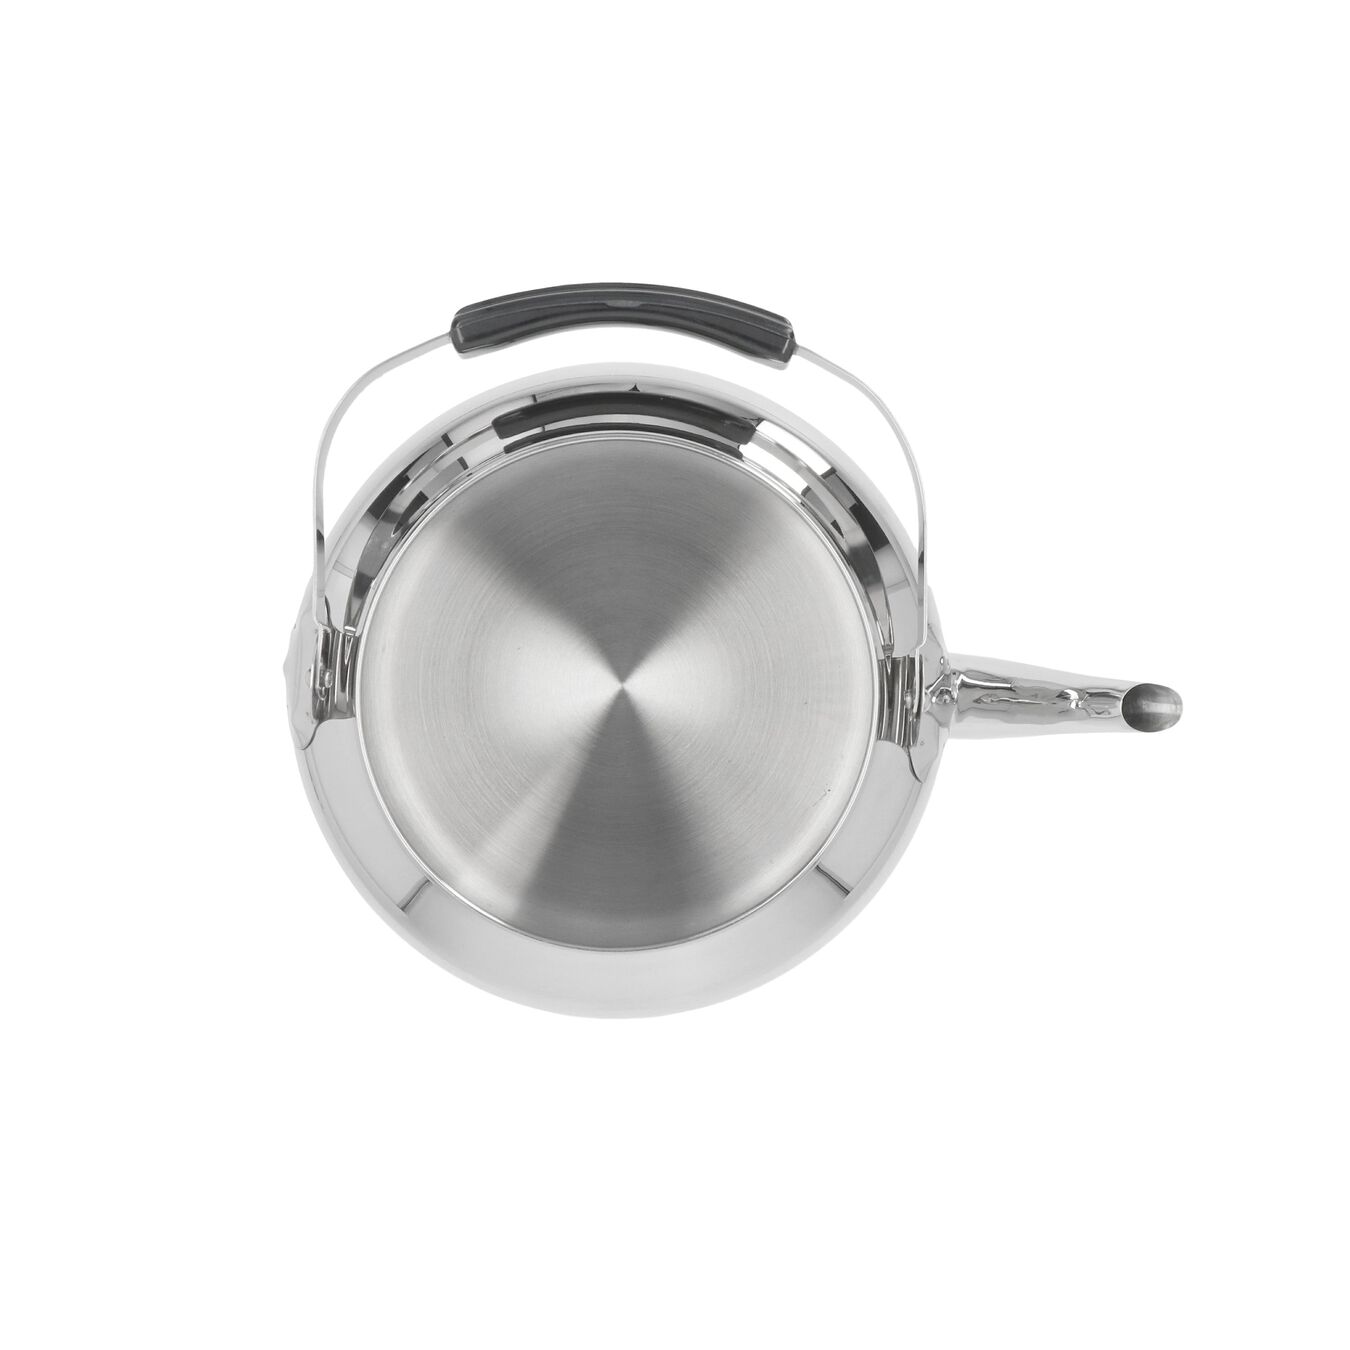 6.25 qt Tea Kettle, 18/10 Stainless Steel ,,large 7